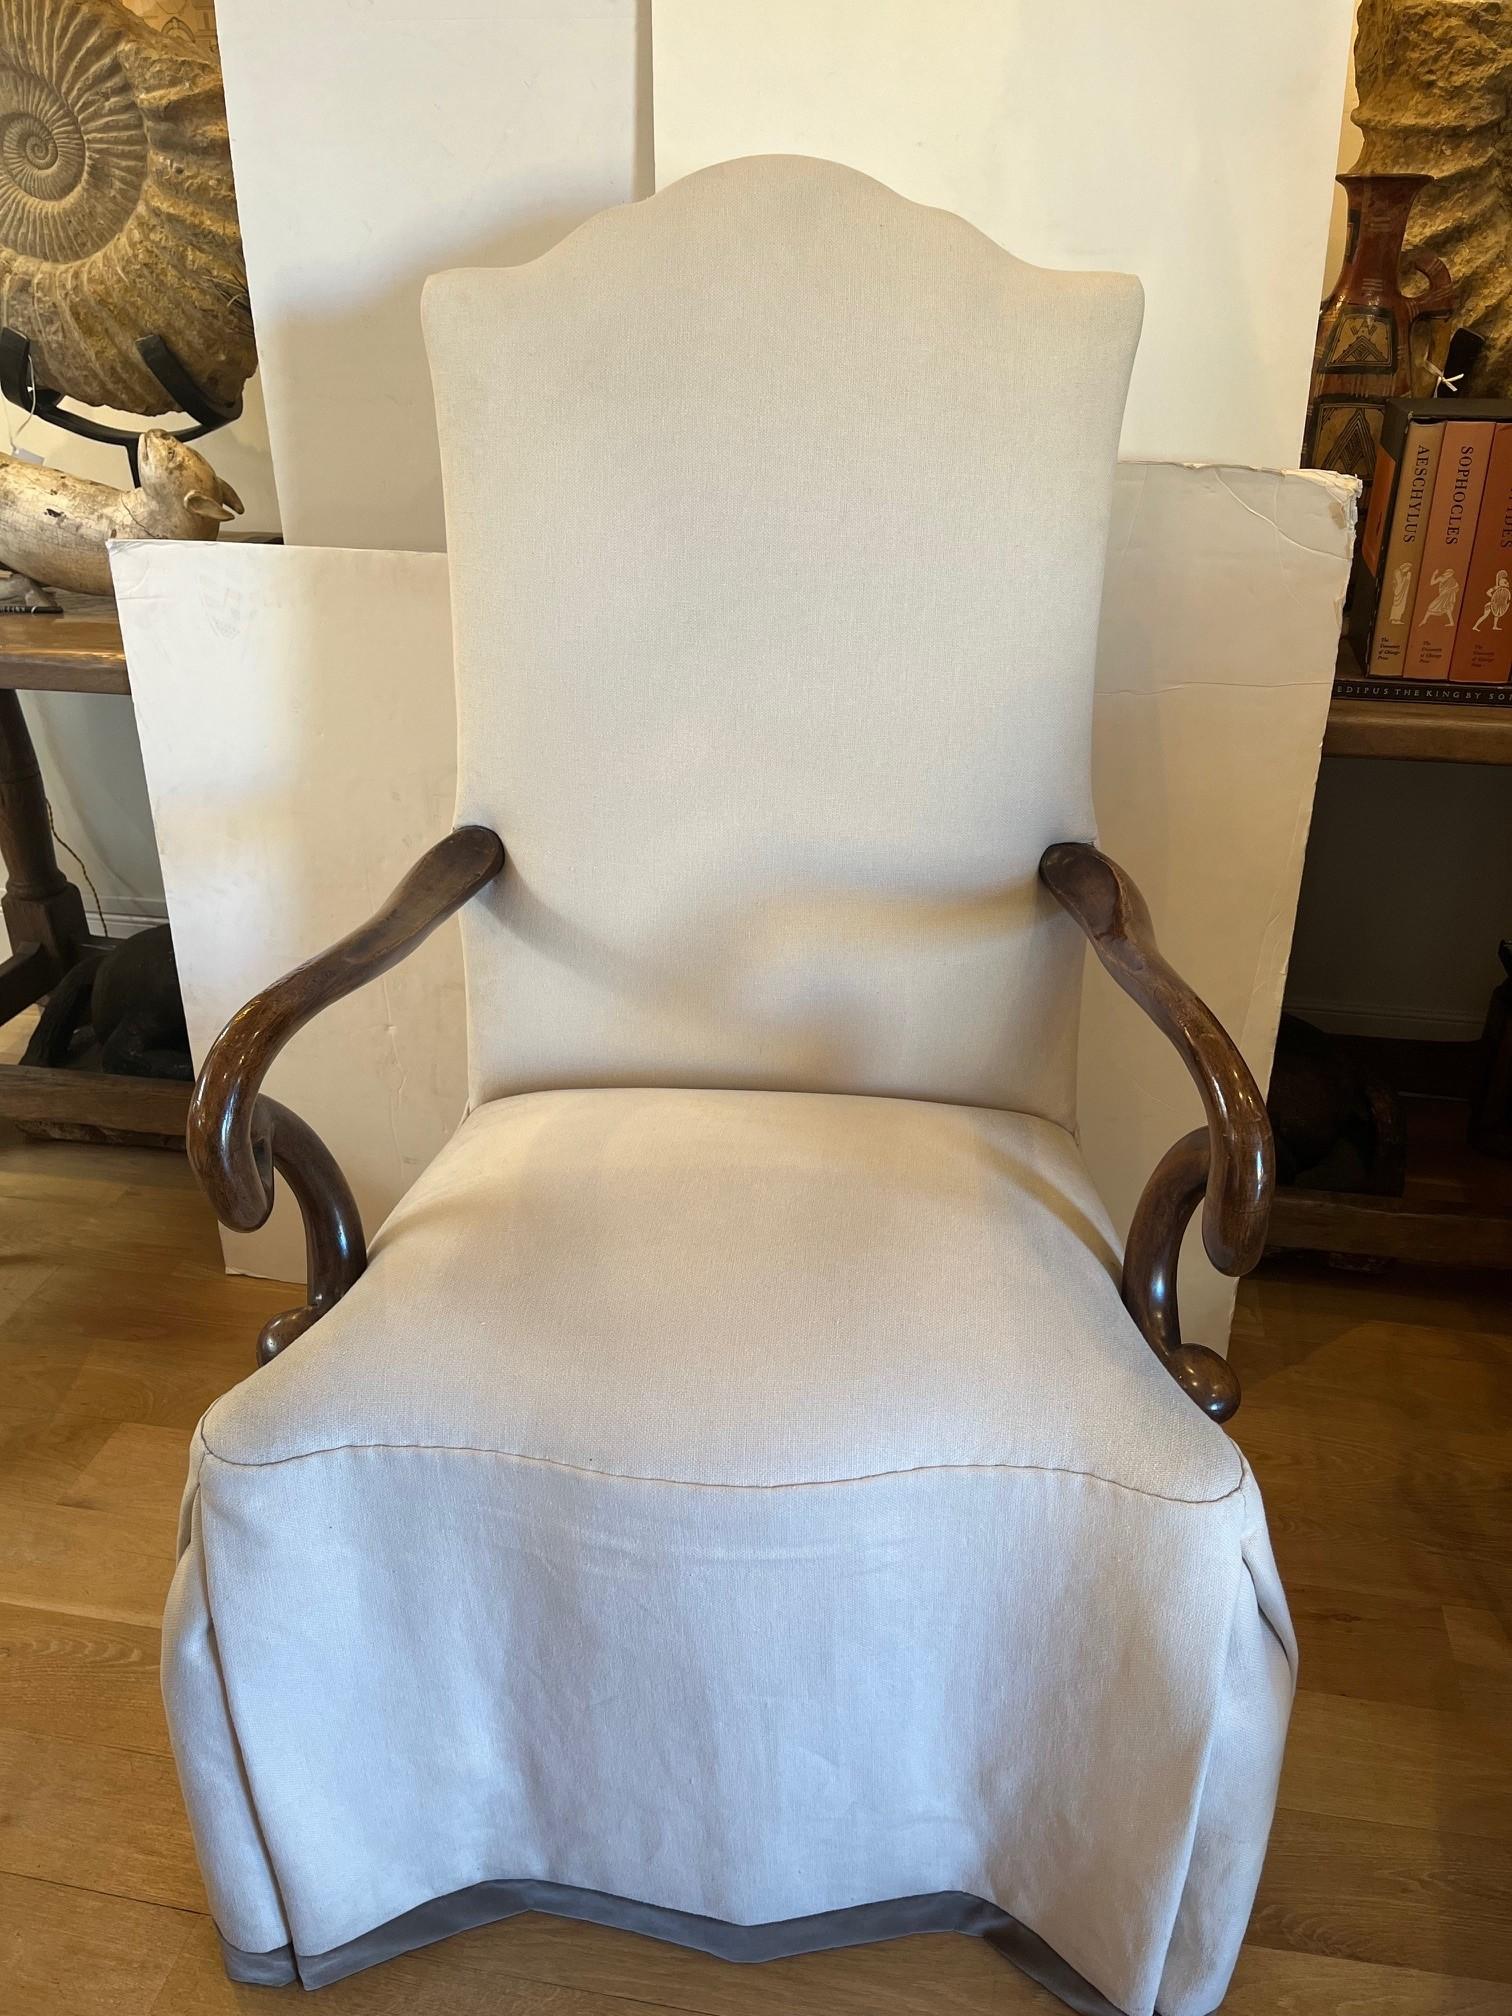 Made to Order Genovese Armchair, Carved Legs and Arms with Distressed Walnut Finish Dining Chair, 
Upholstery: Customer Own Material